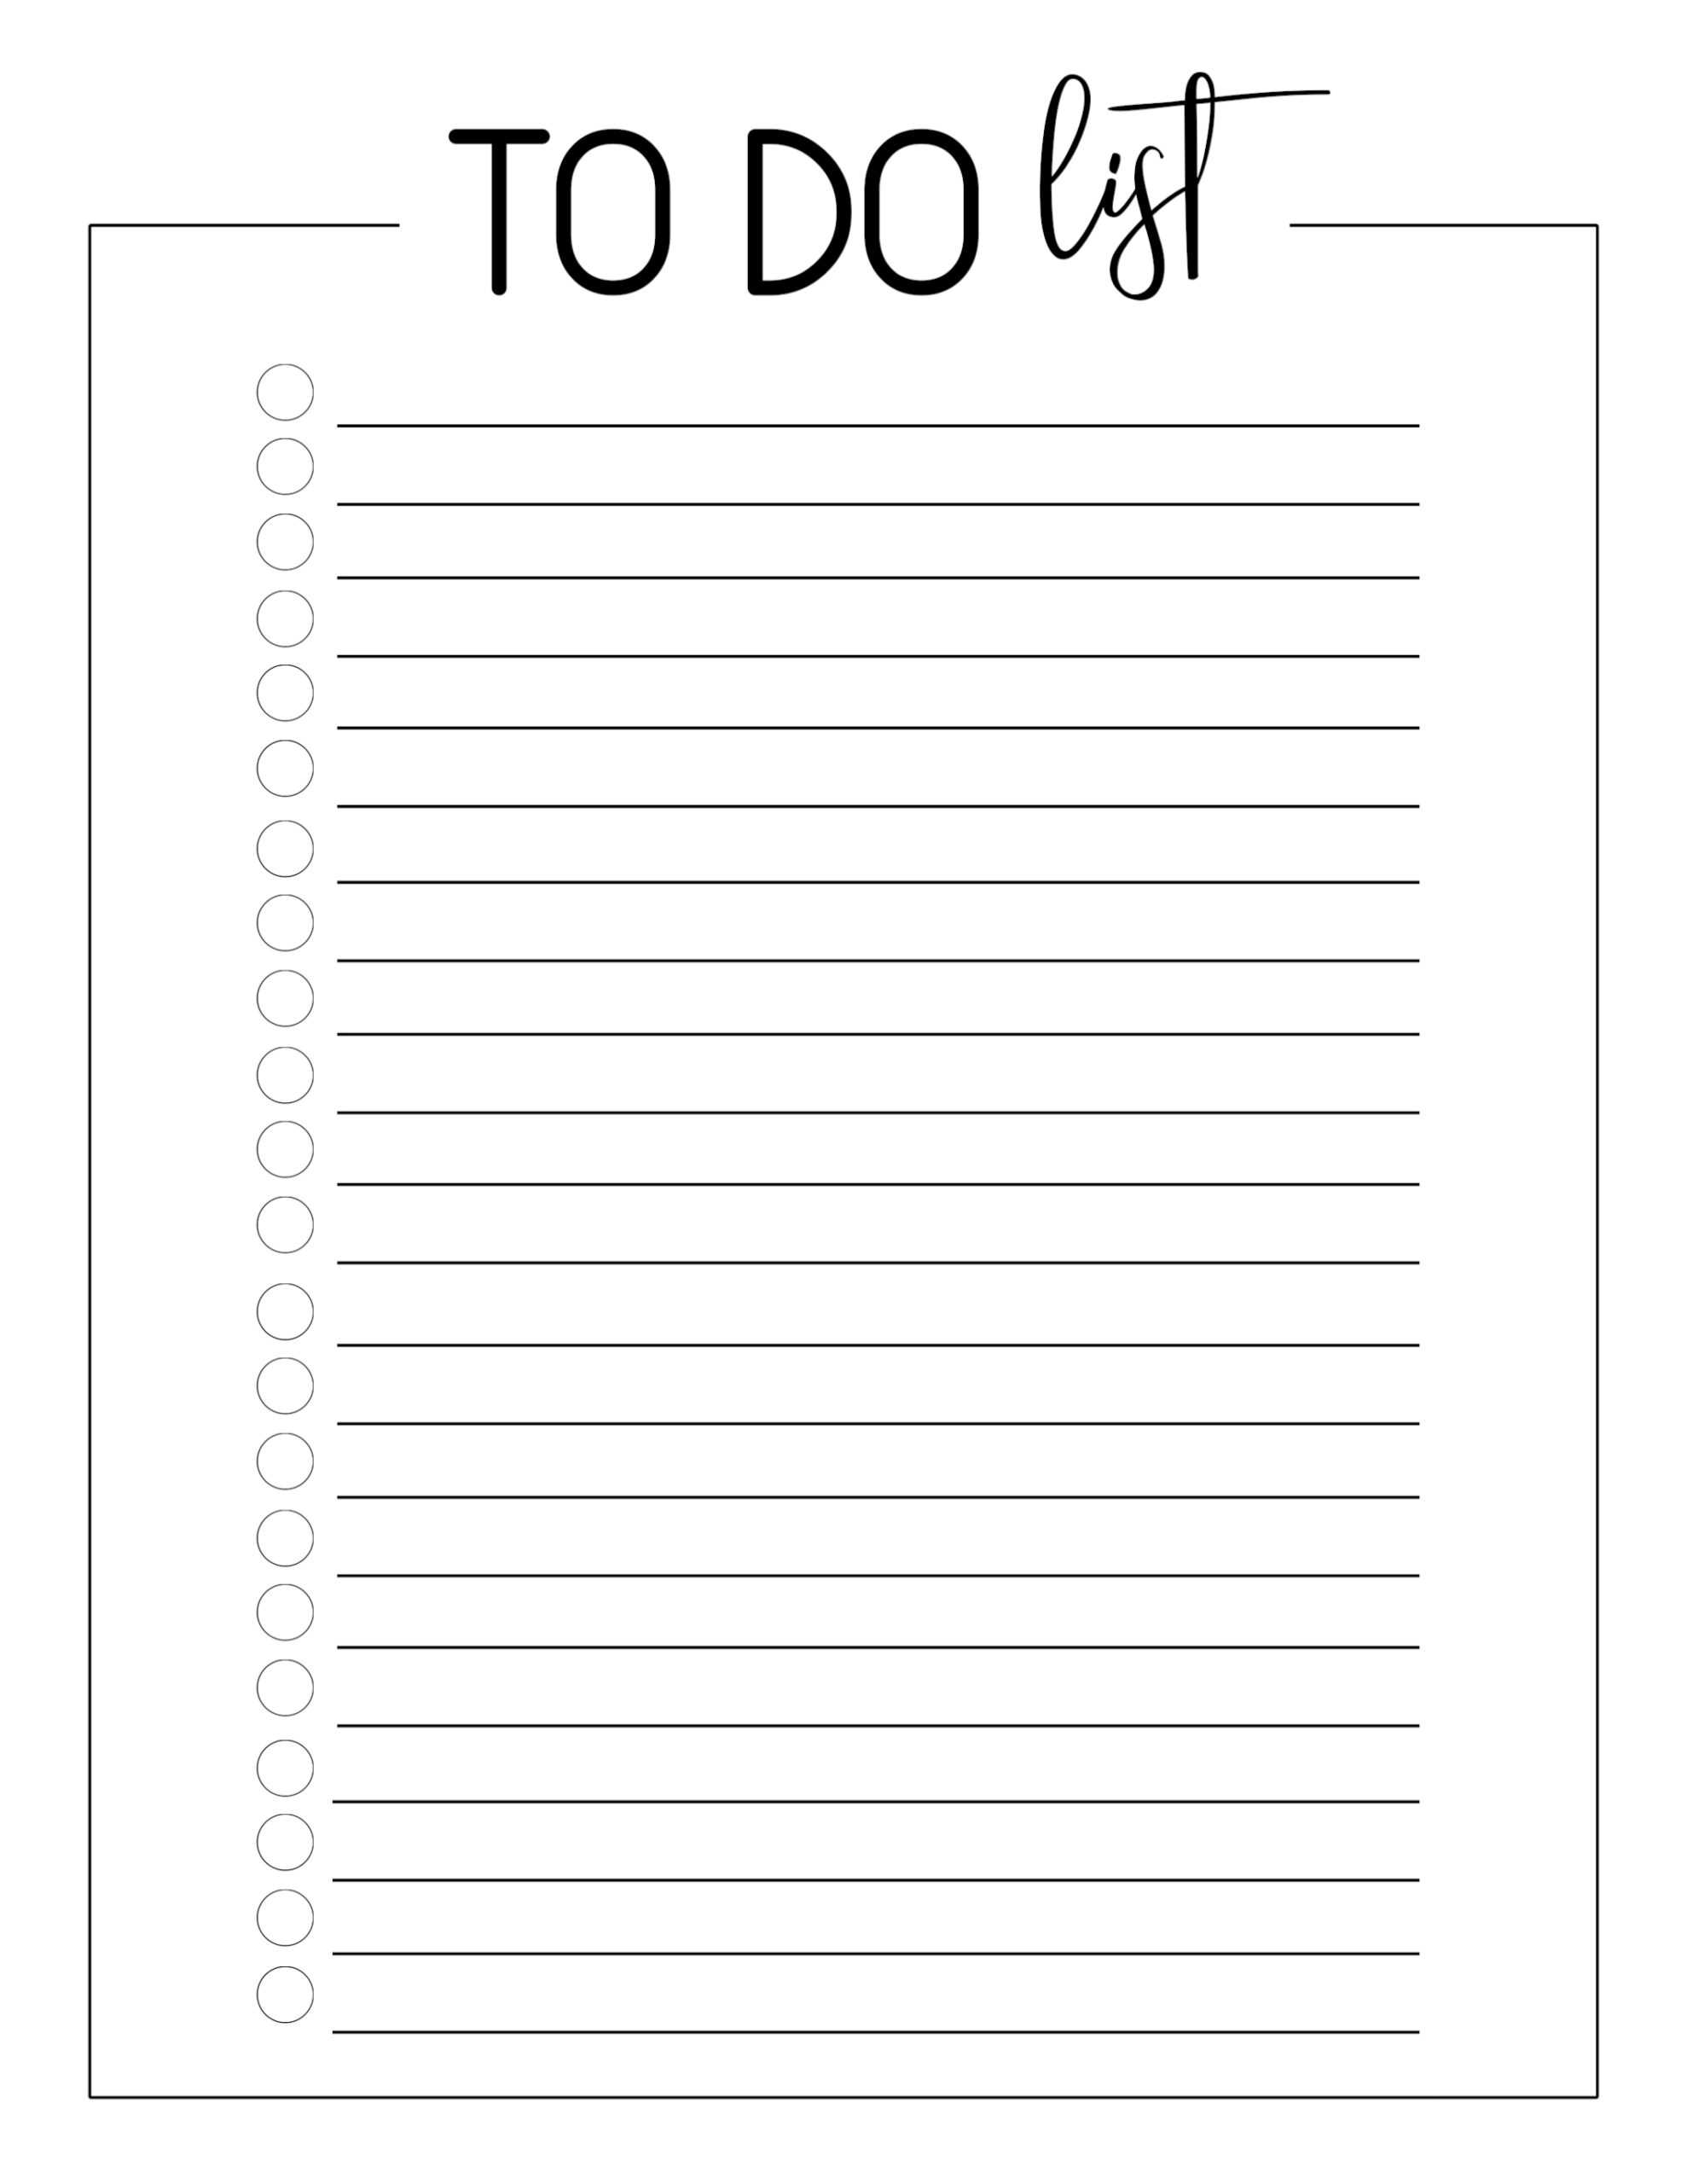 3Cf515 Blank Checklist Templates | Wiring Library Throughout Blank To Do List Template